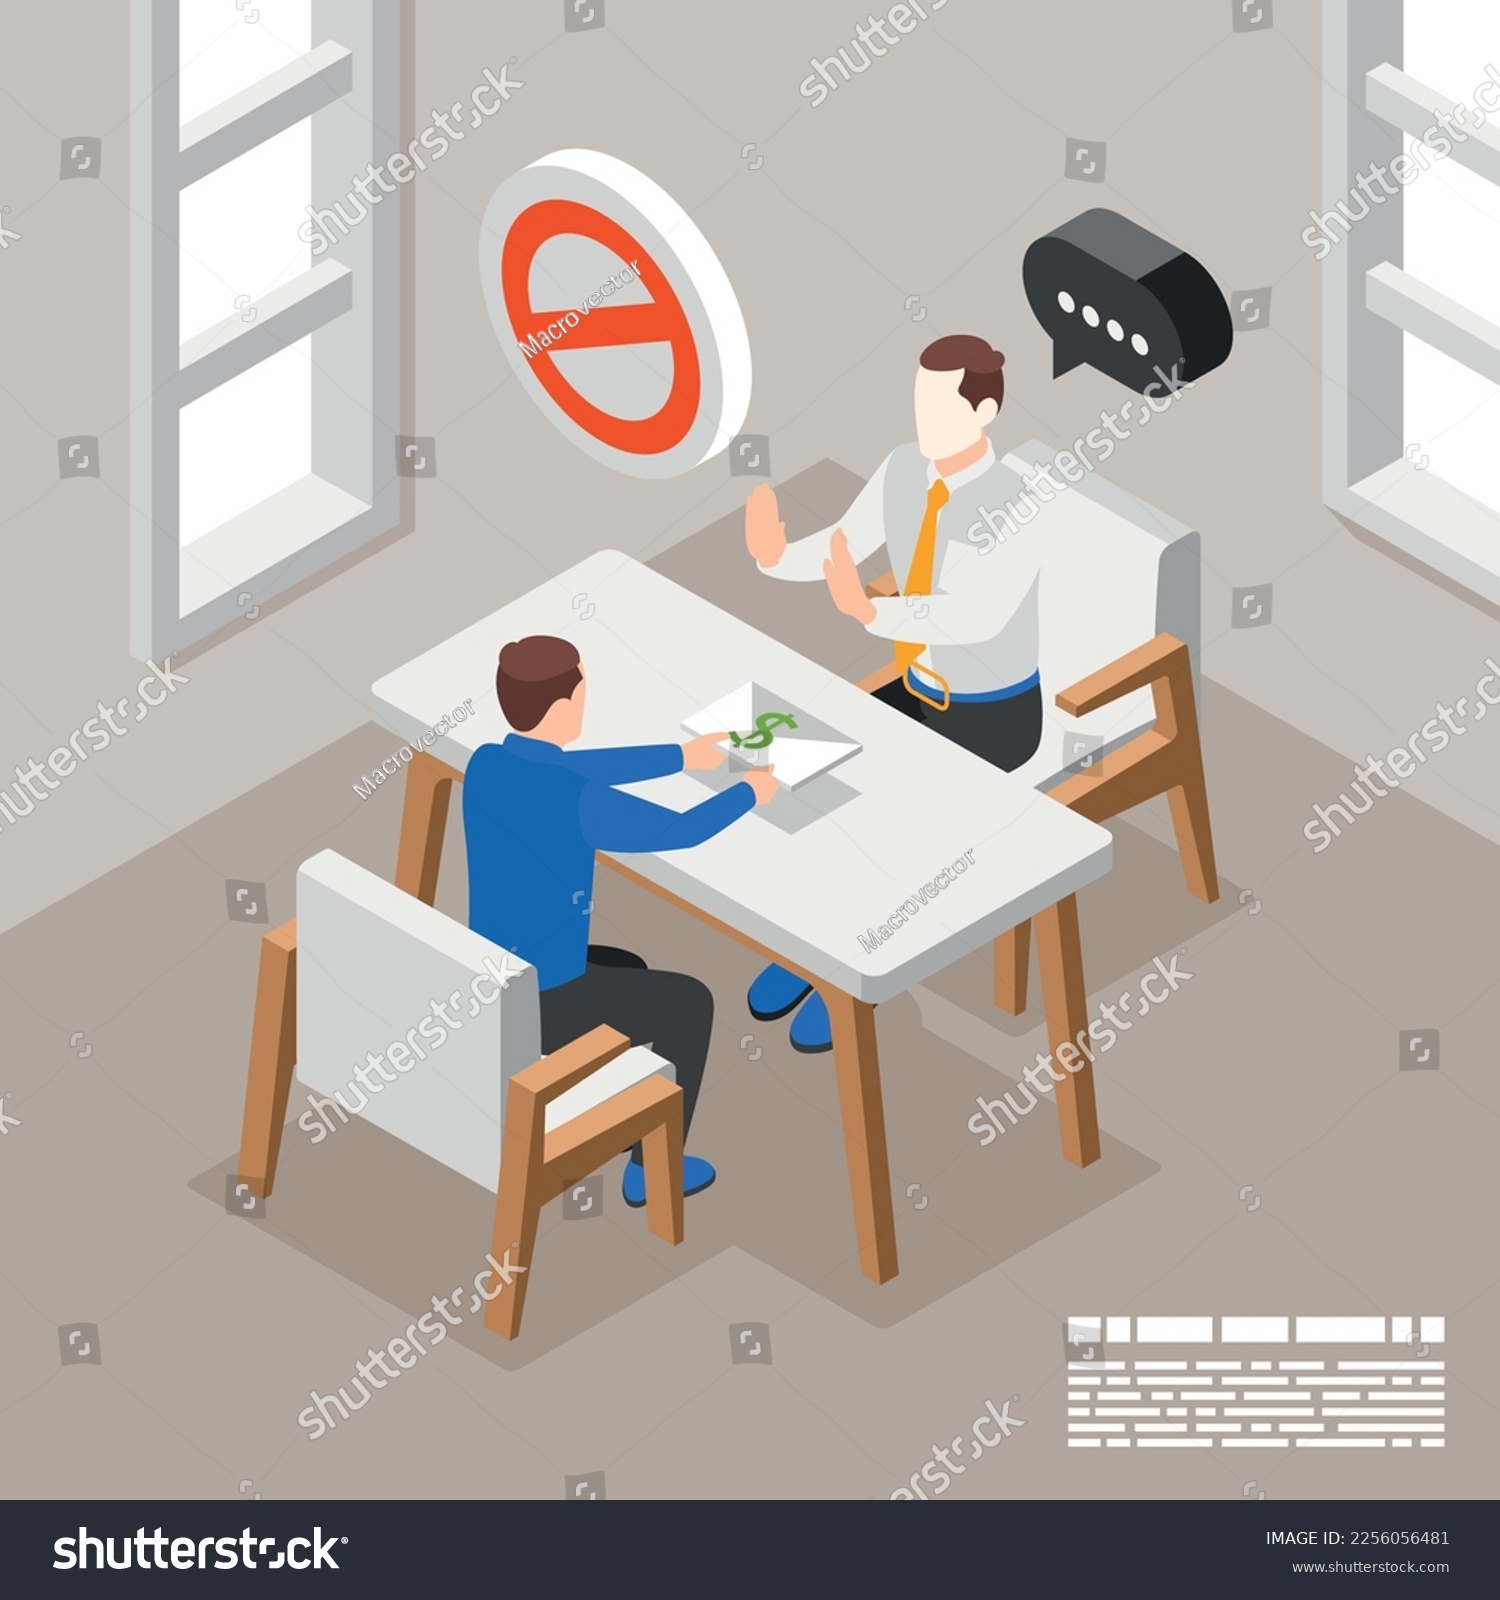 SVG of Isometric concept of esg and anti corruption policy with man rejecting bribe 3d vector illustration svg